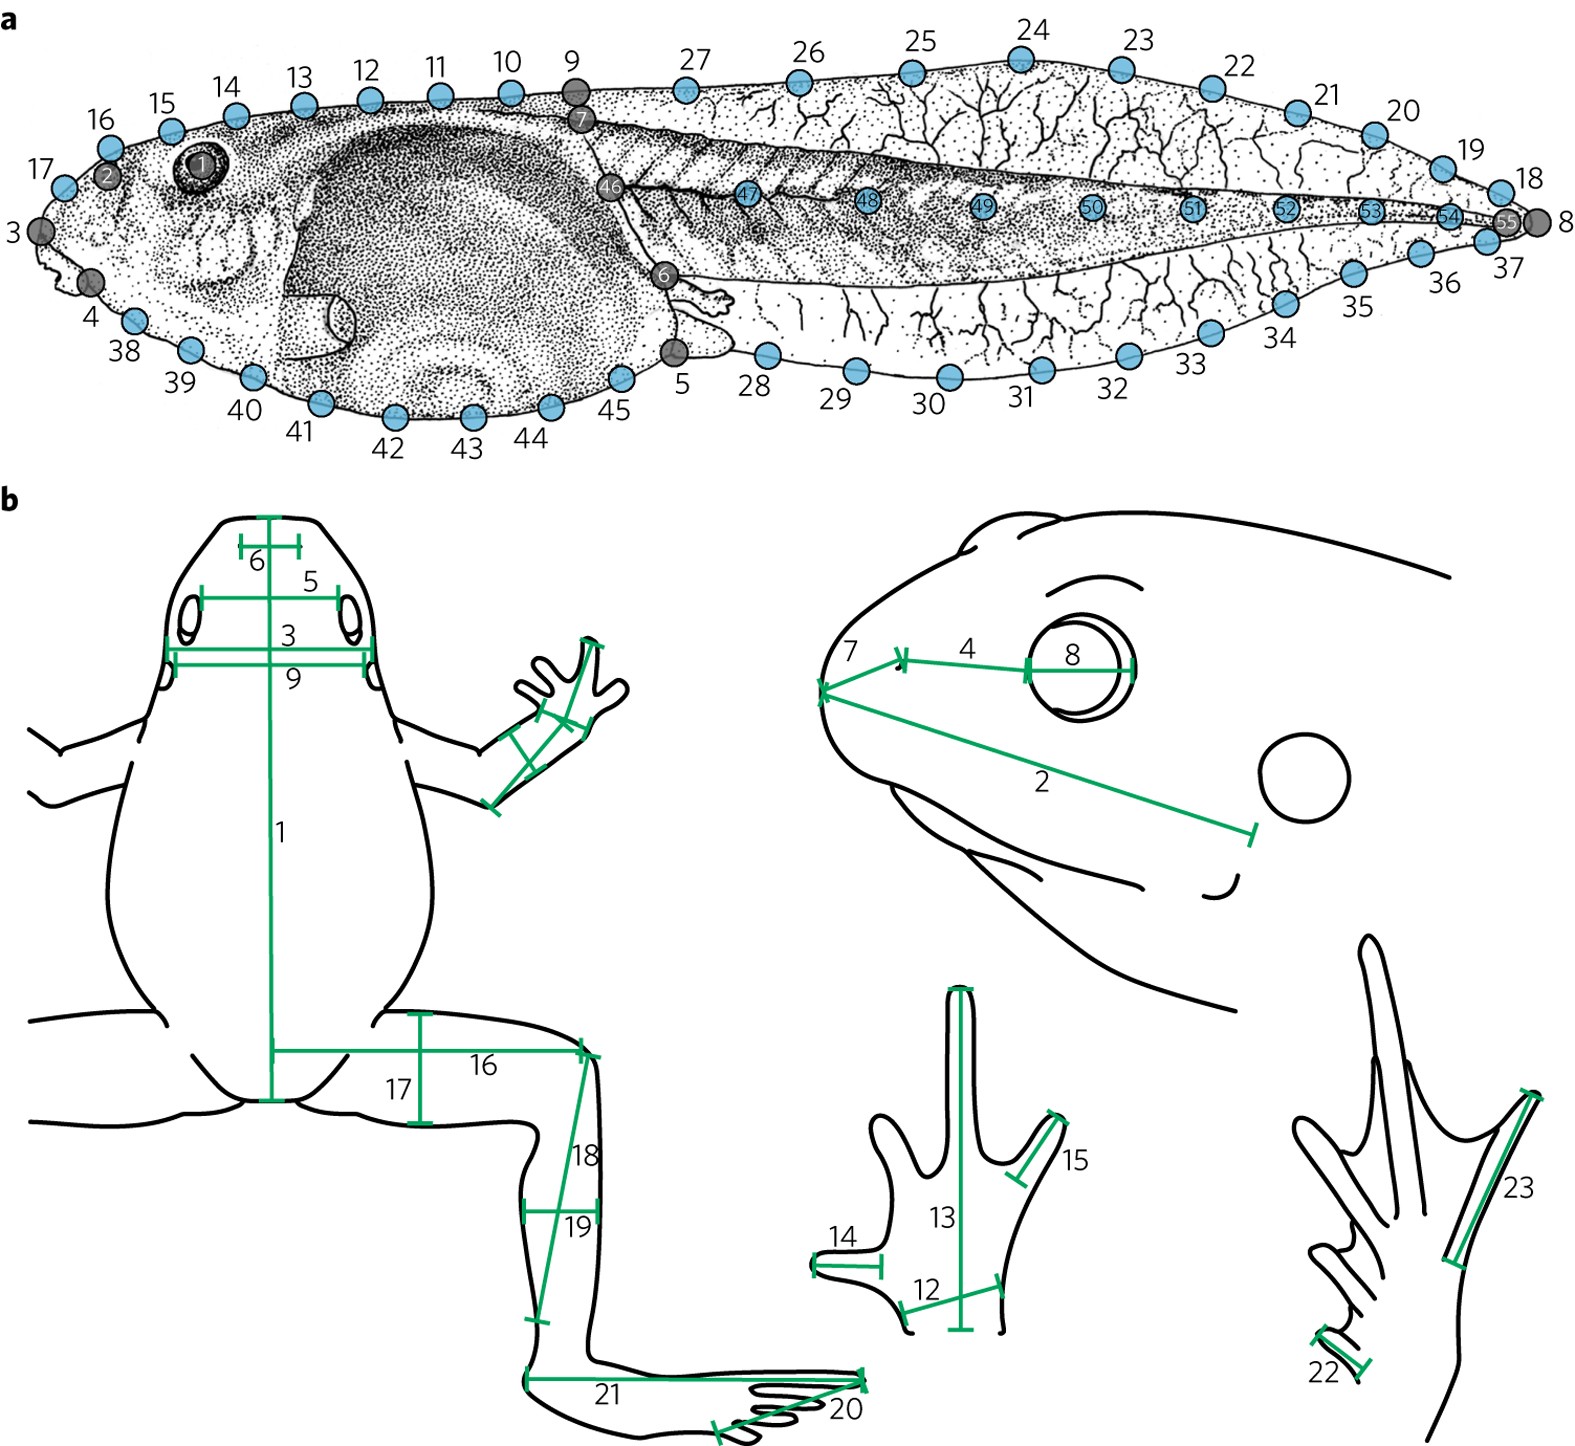 Adult frogs and tadpoles have different macroevolutionary patterns